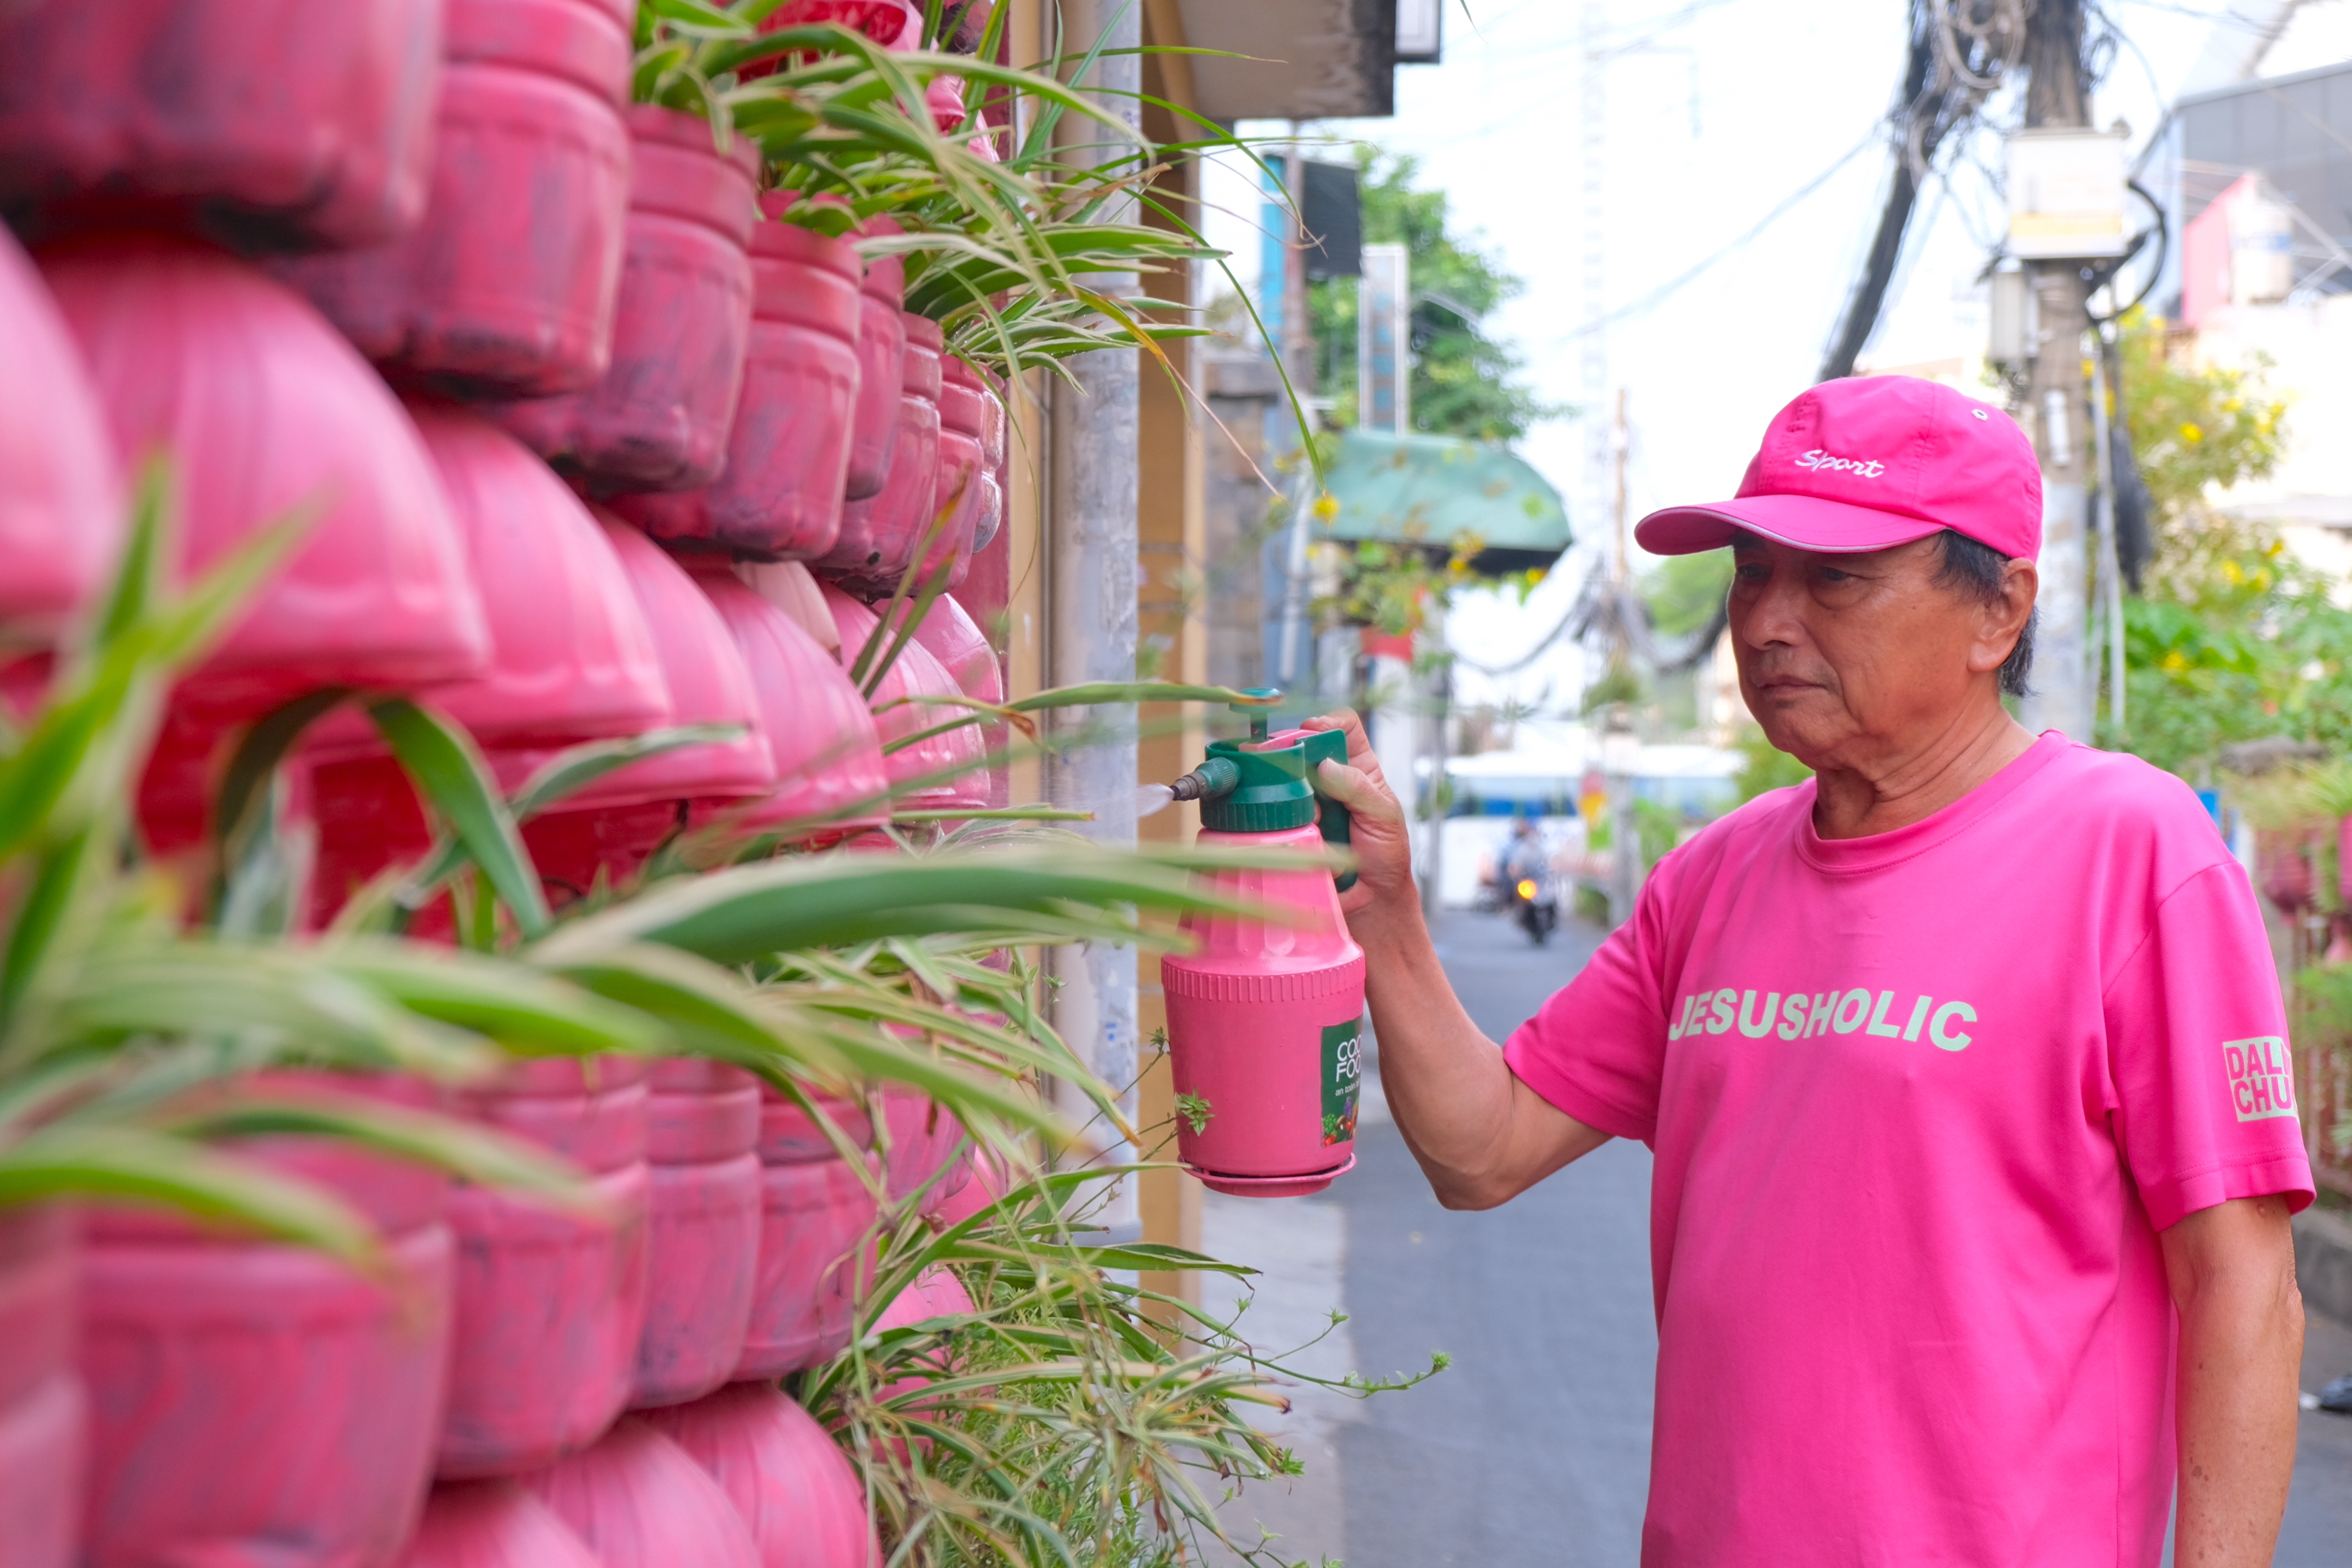 Chanh waters flower pots in front of his pink house in Phu Nhuan District, Ho Chi Minh City. Photo: Ngoc Phuong / Tuoi Tre News